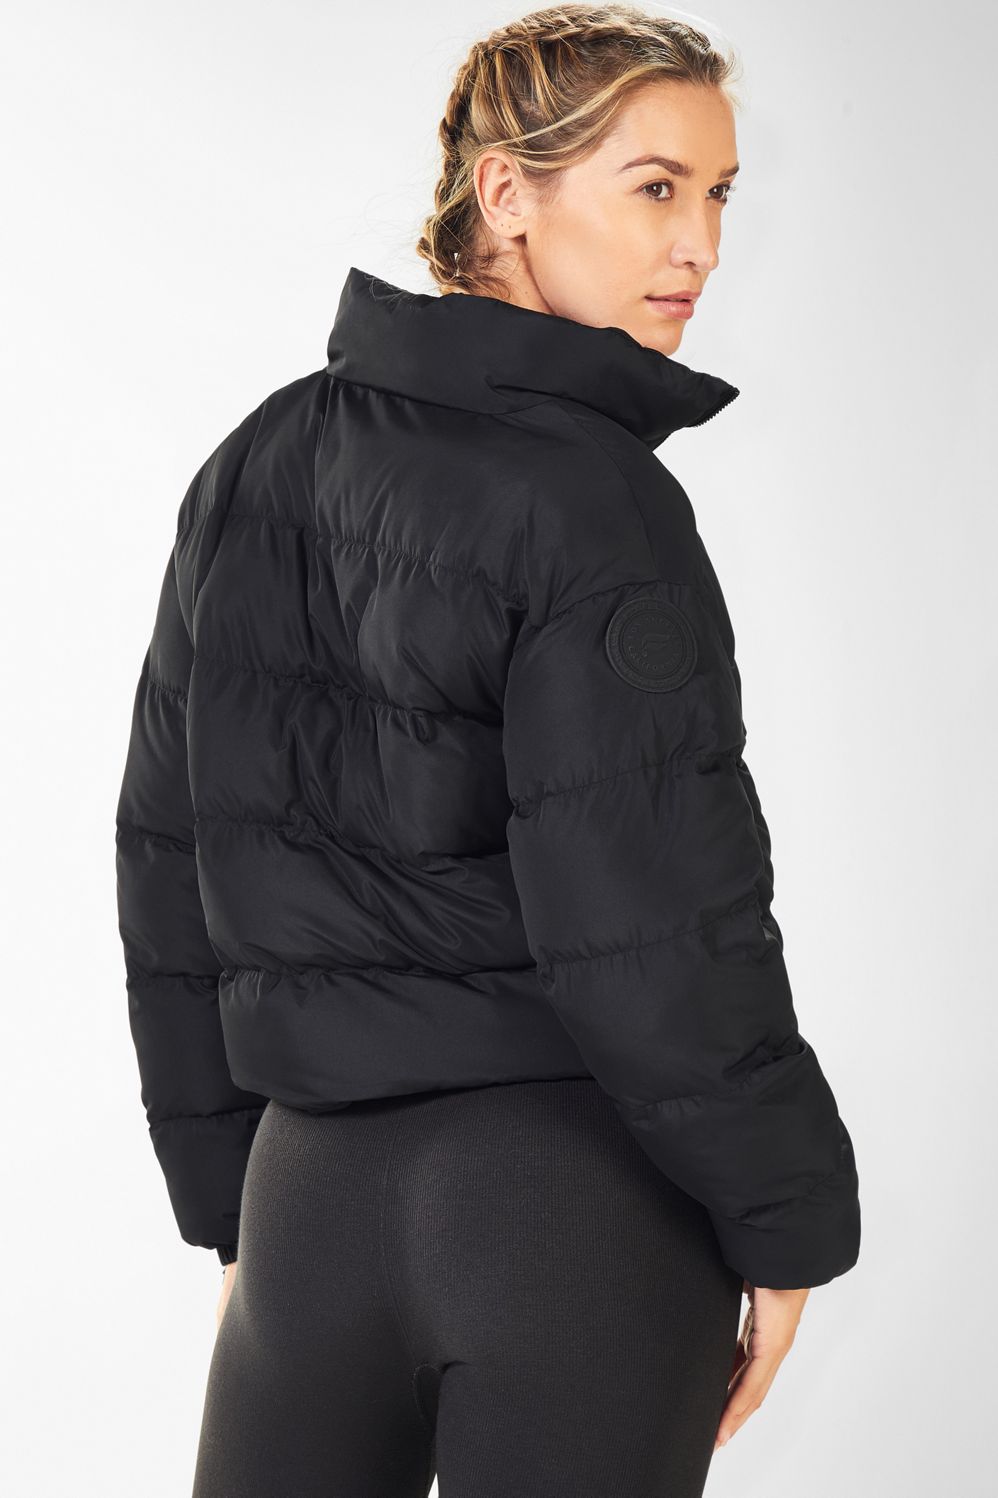 going to be wearing this @fabletics puffer all fall